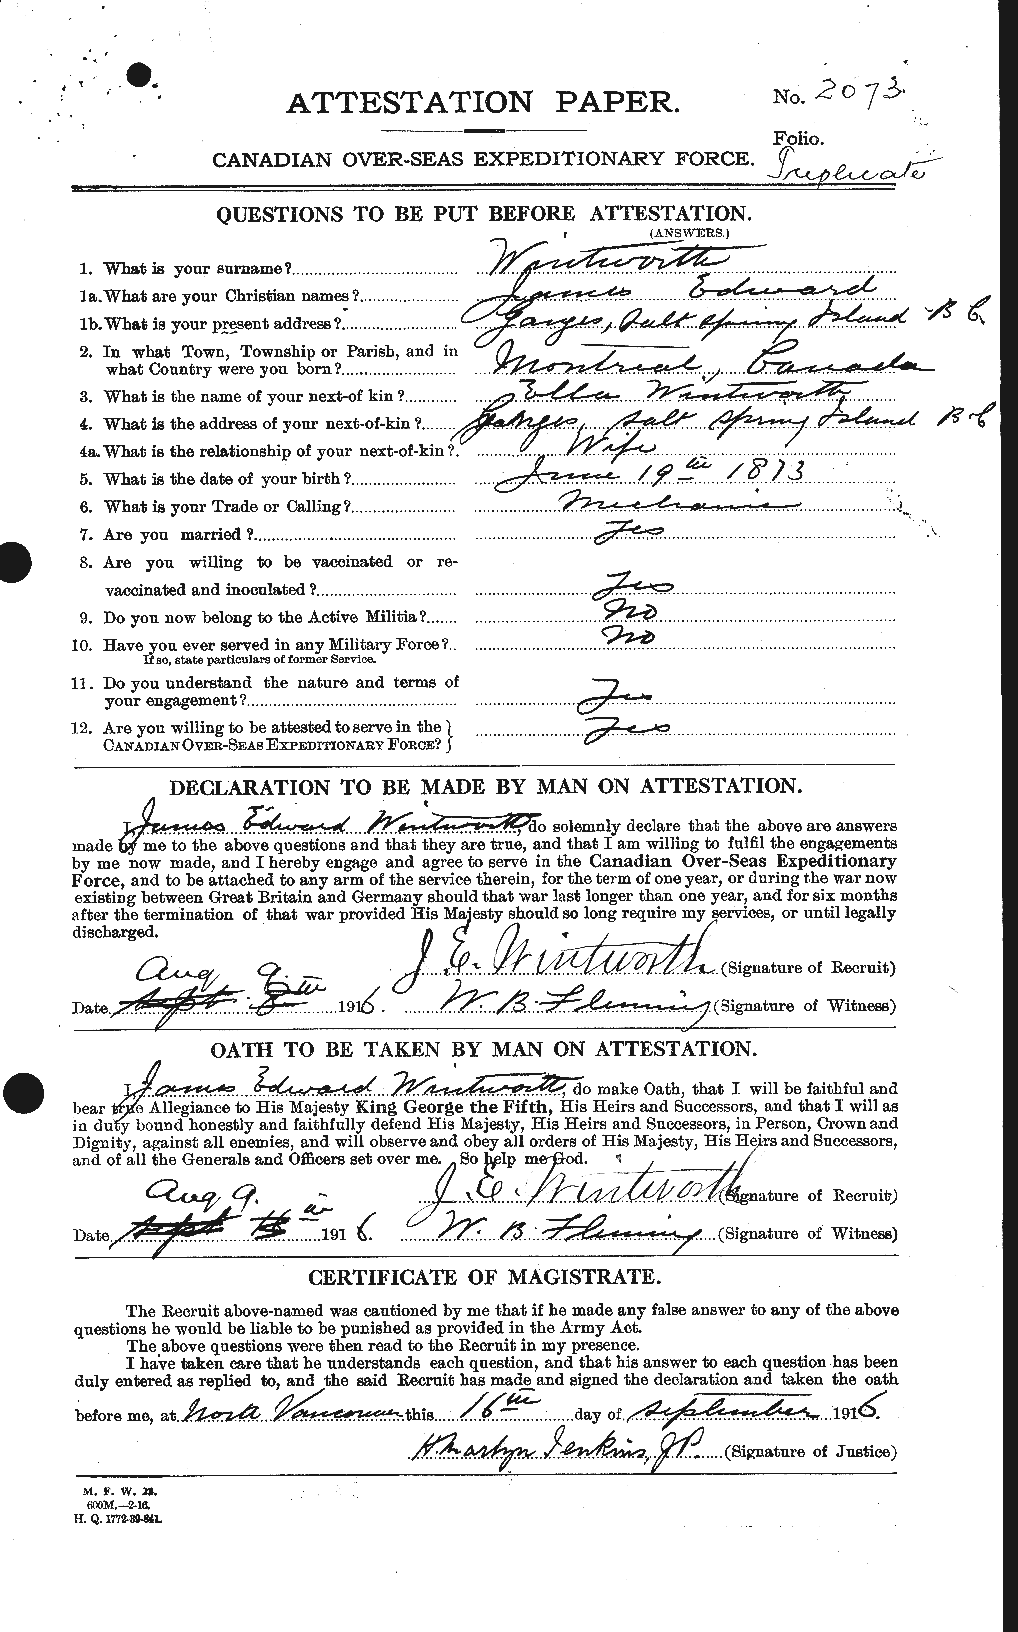 Personnel Records of the First World War - CEF 685961a